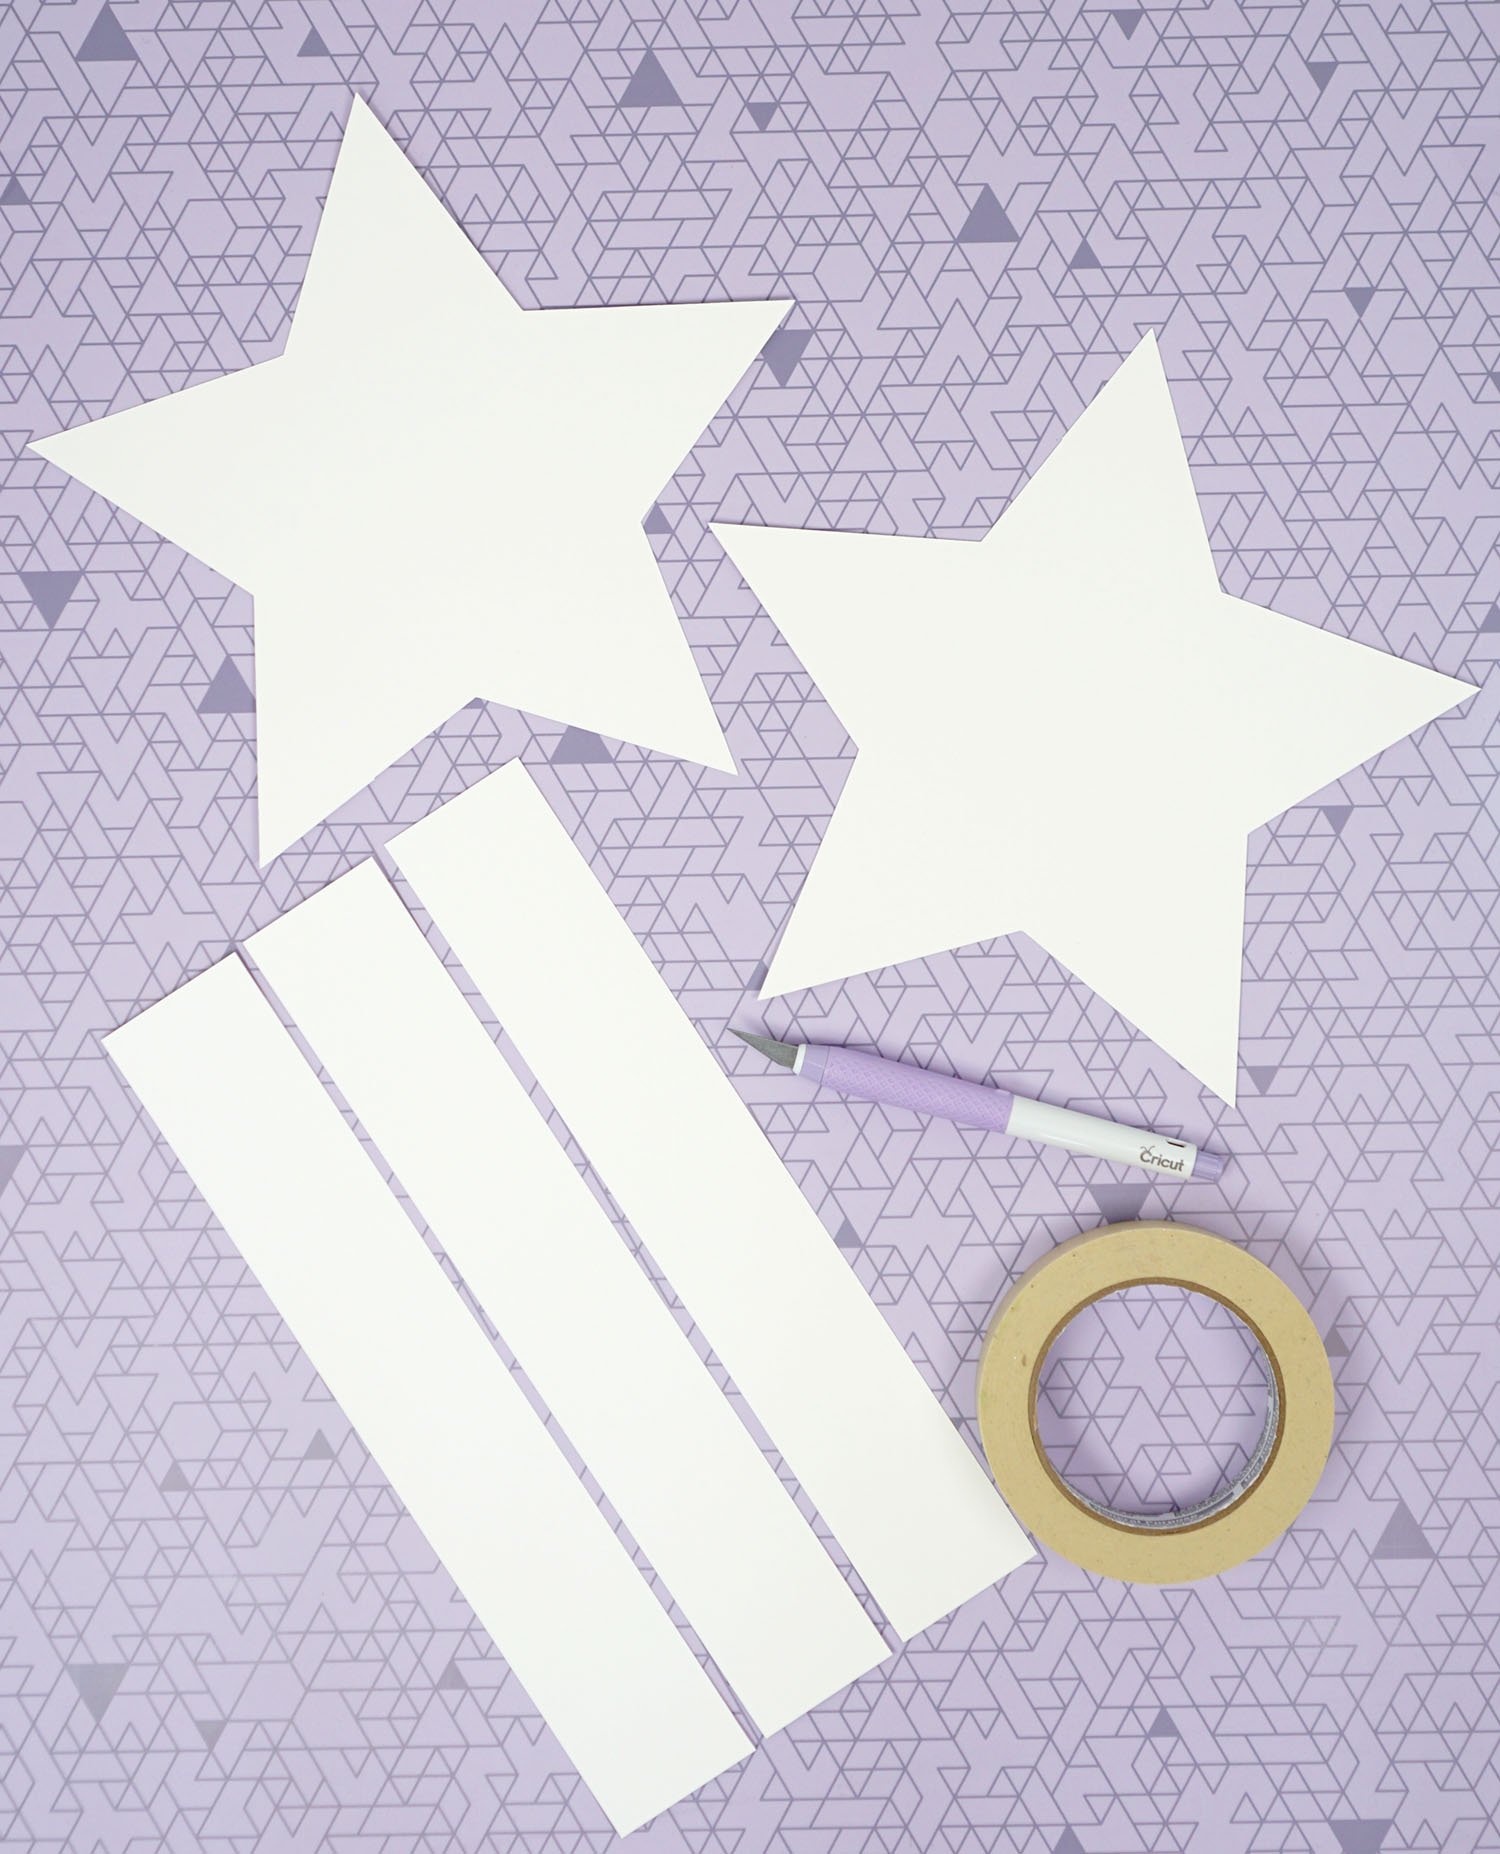 cut out star shapes and sides for pinata